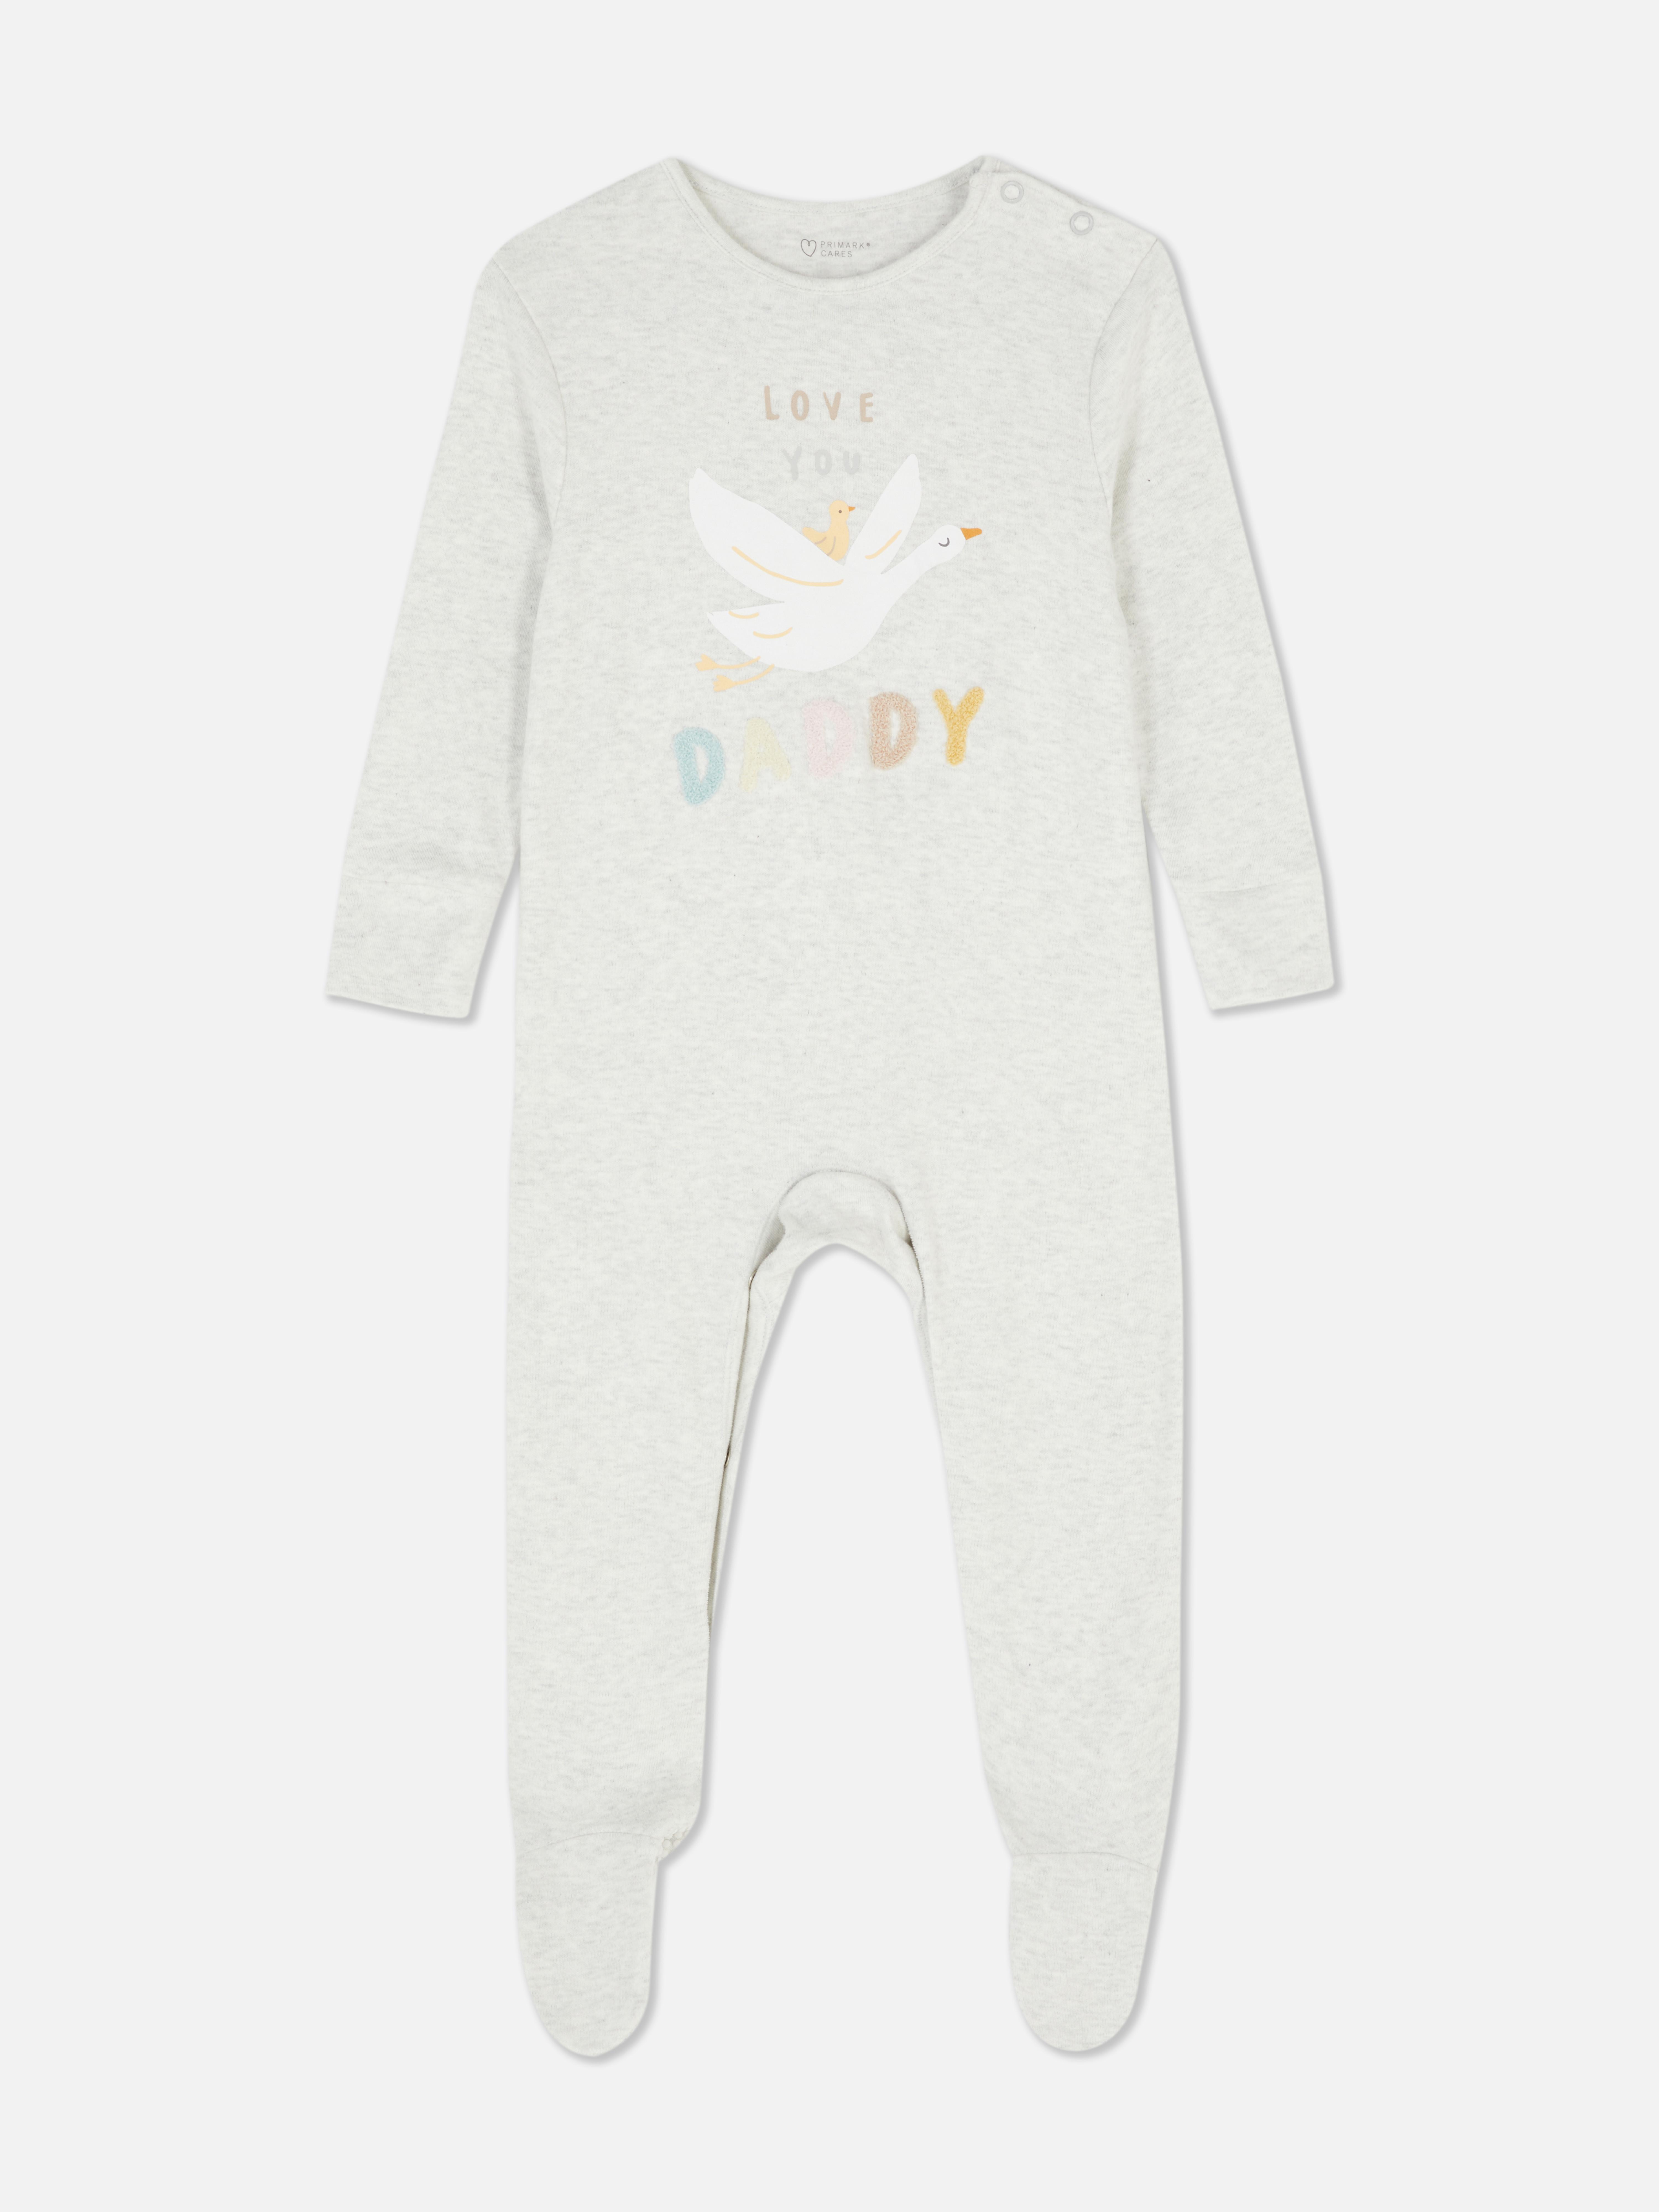 Love You Daddy Sleepsuit